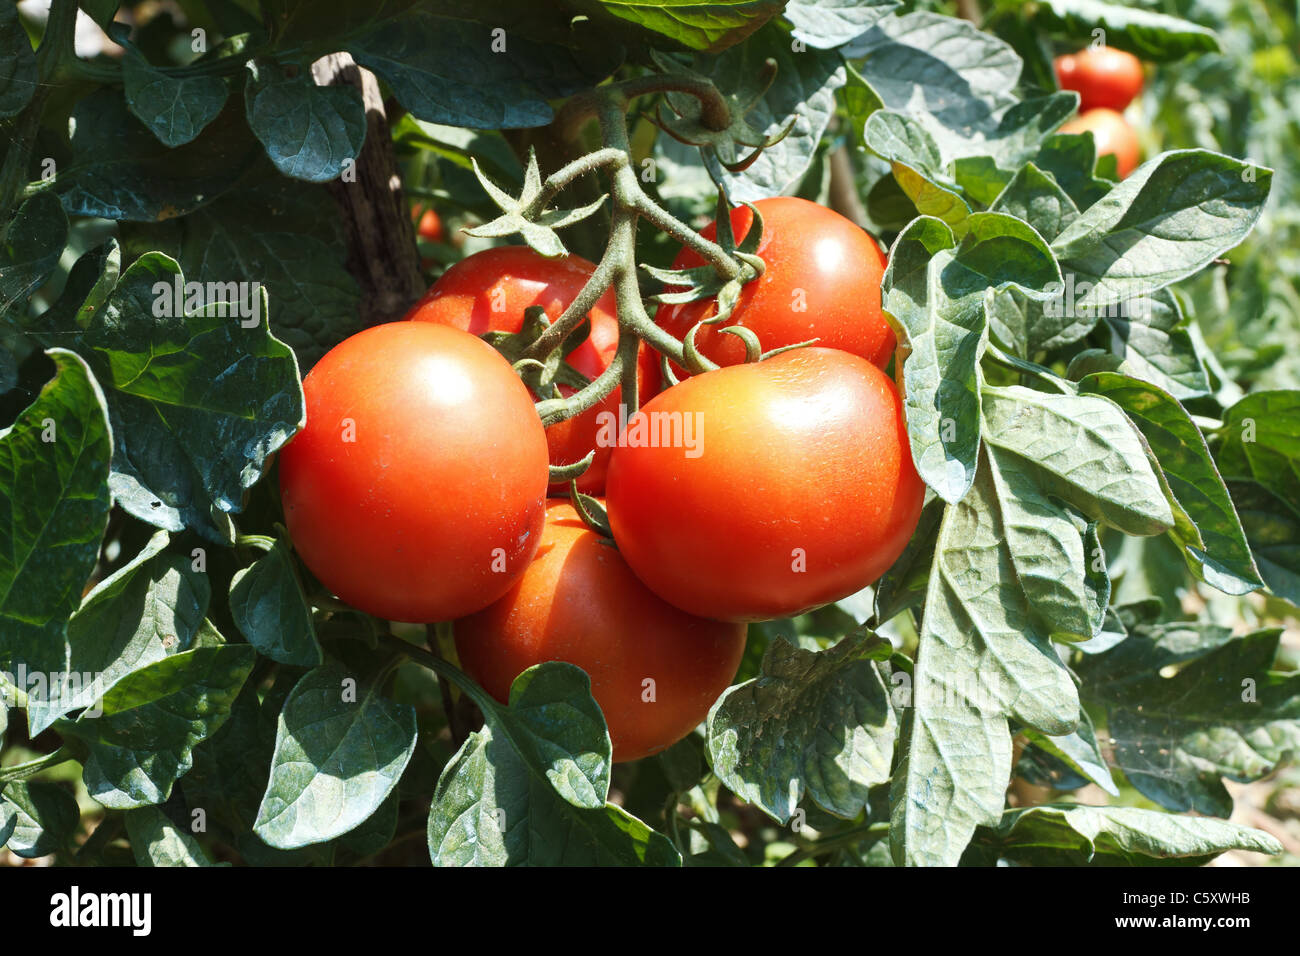 detail of tomato plant with ripe red fruits Stock Photo